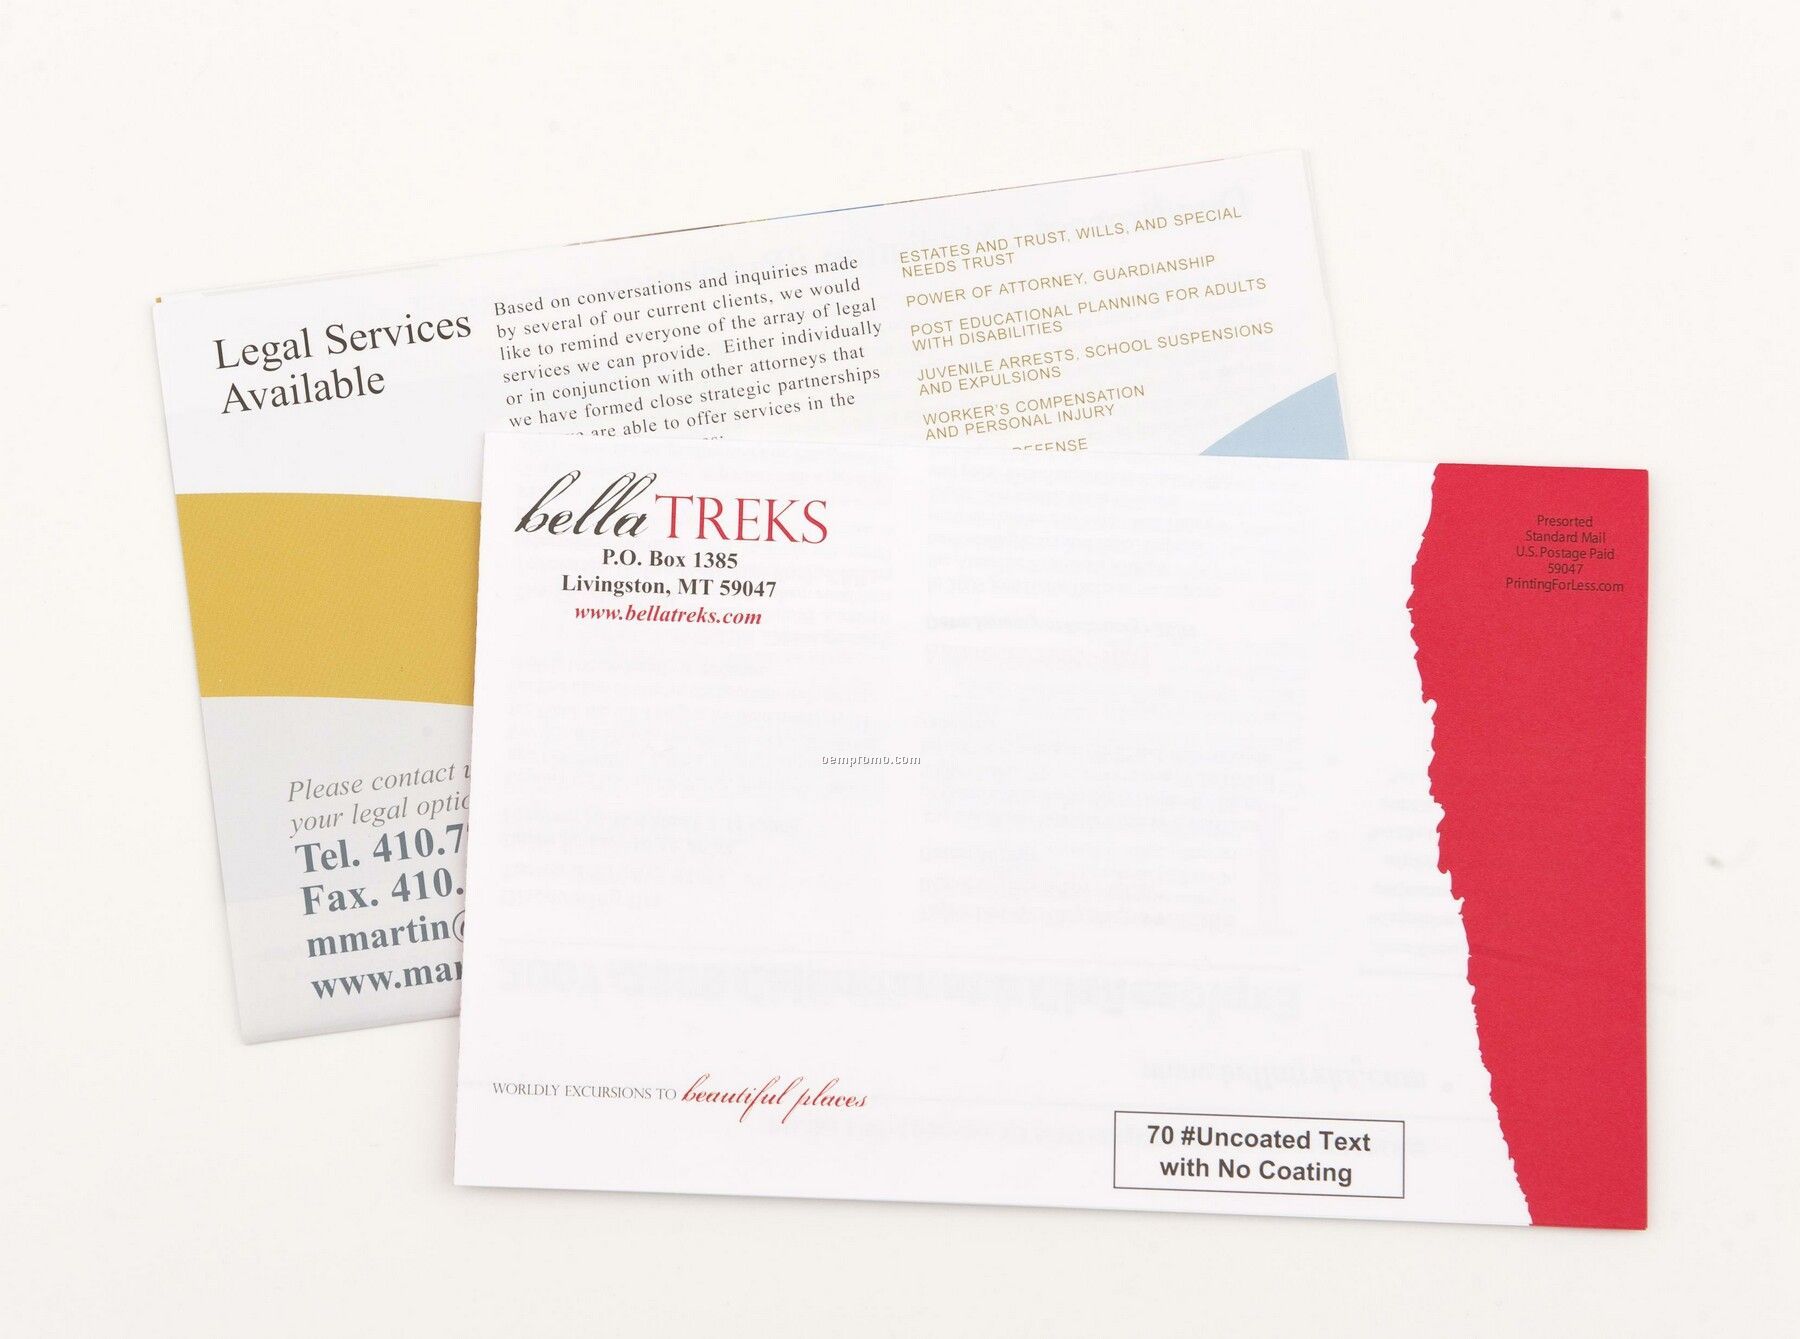 Newsletter - 70 Lb. Uncoated Text/ 8.5"X11" (Full Color/ Blank)